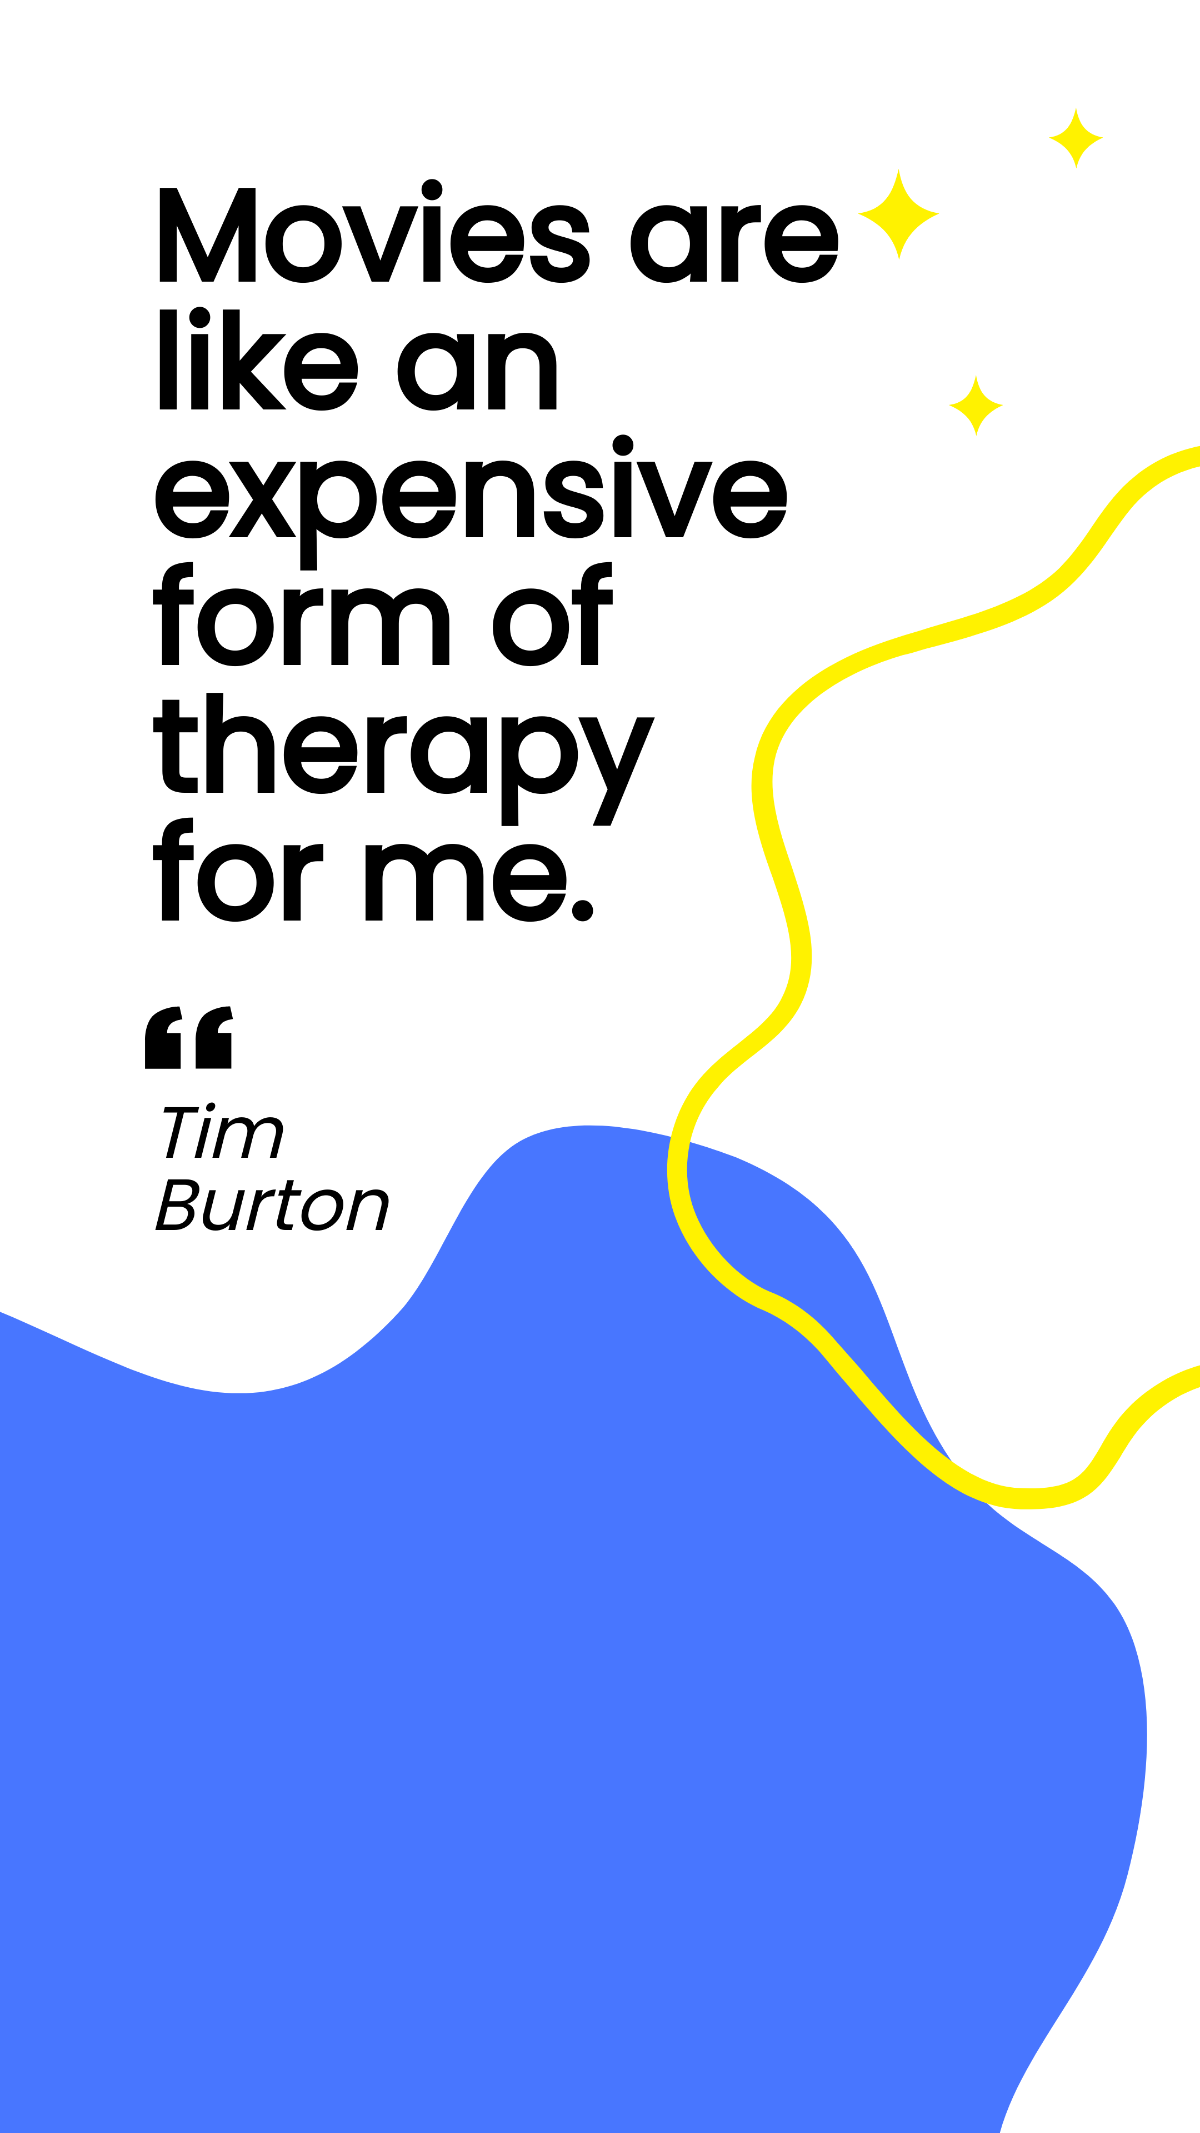 Tim Burton - Movies are like an expensive form of therapy for me. Template